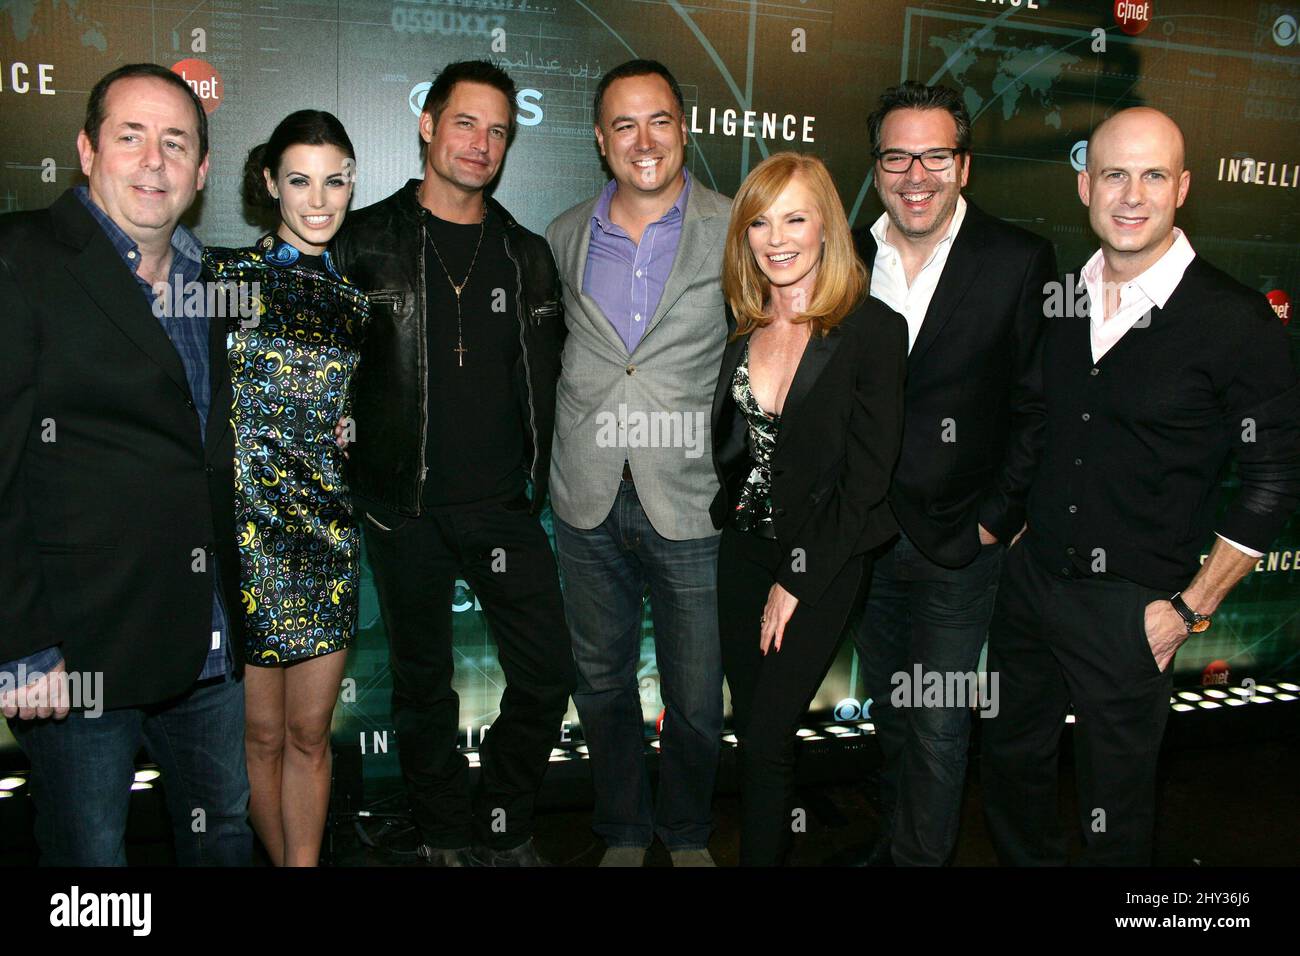 Barry Schindel, Meghan Ory, Josh Holloway, Guest, Marg Helgenber attending the CNET'S 'Intelligence' Premiere Party, TAO Nightclub at The Venetian Resort Hotel and Casino Stock Photo